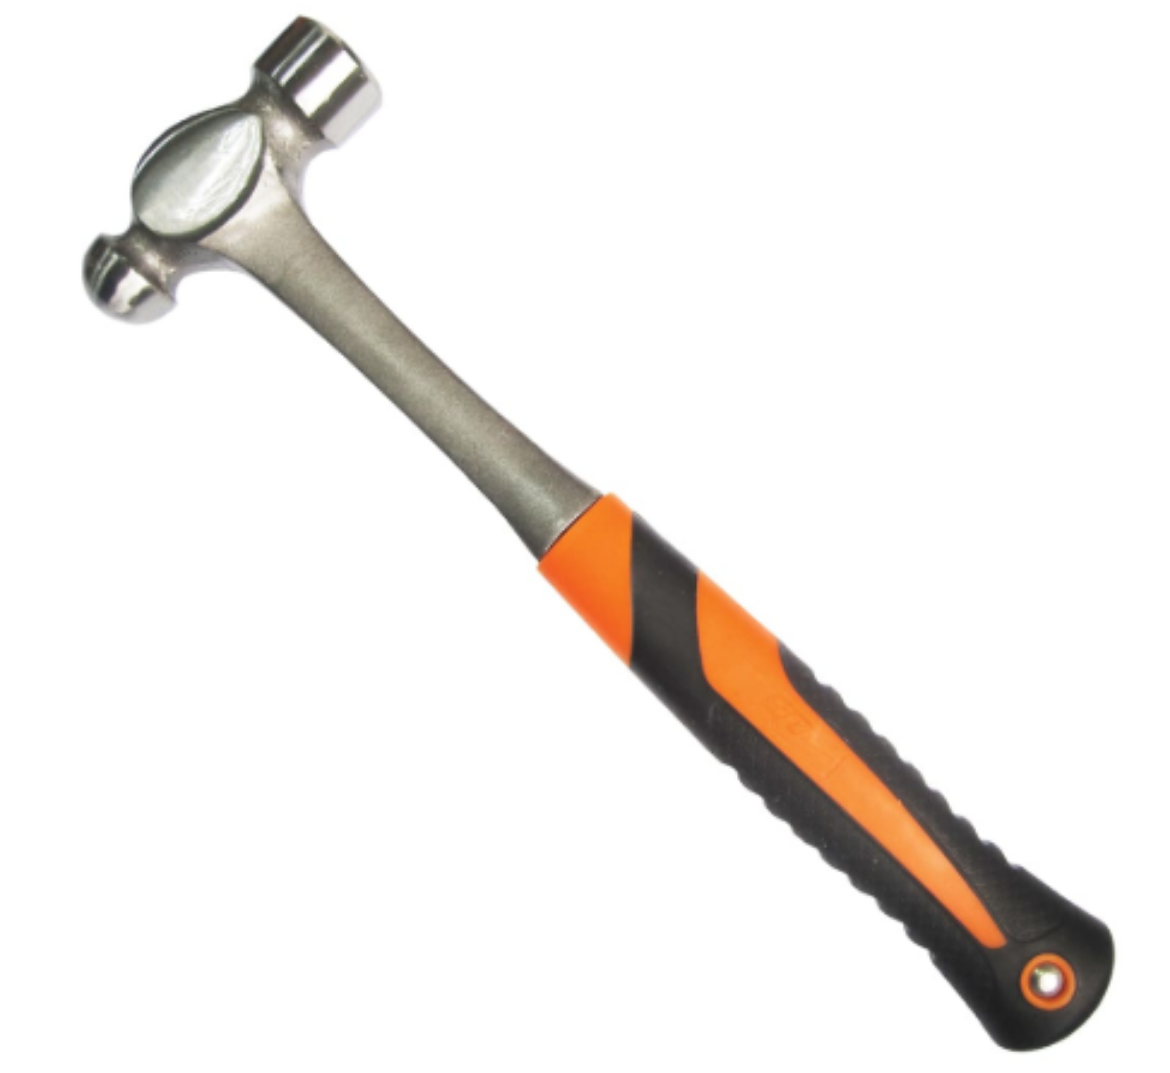 Picture of Ball Pein Hammer 1.5lb(24oz)/680g, Fibreglass Handle One-Piece